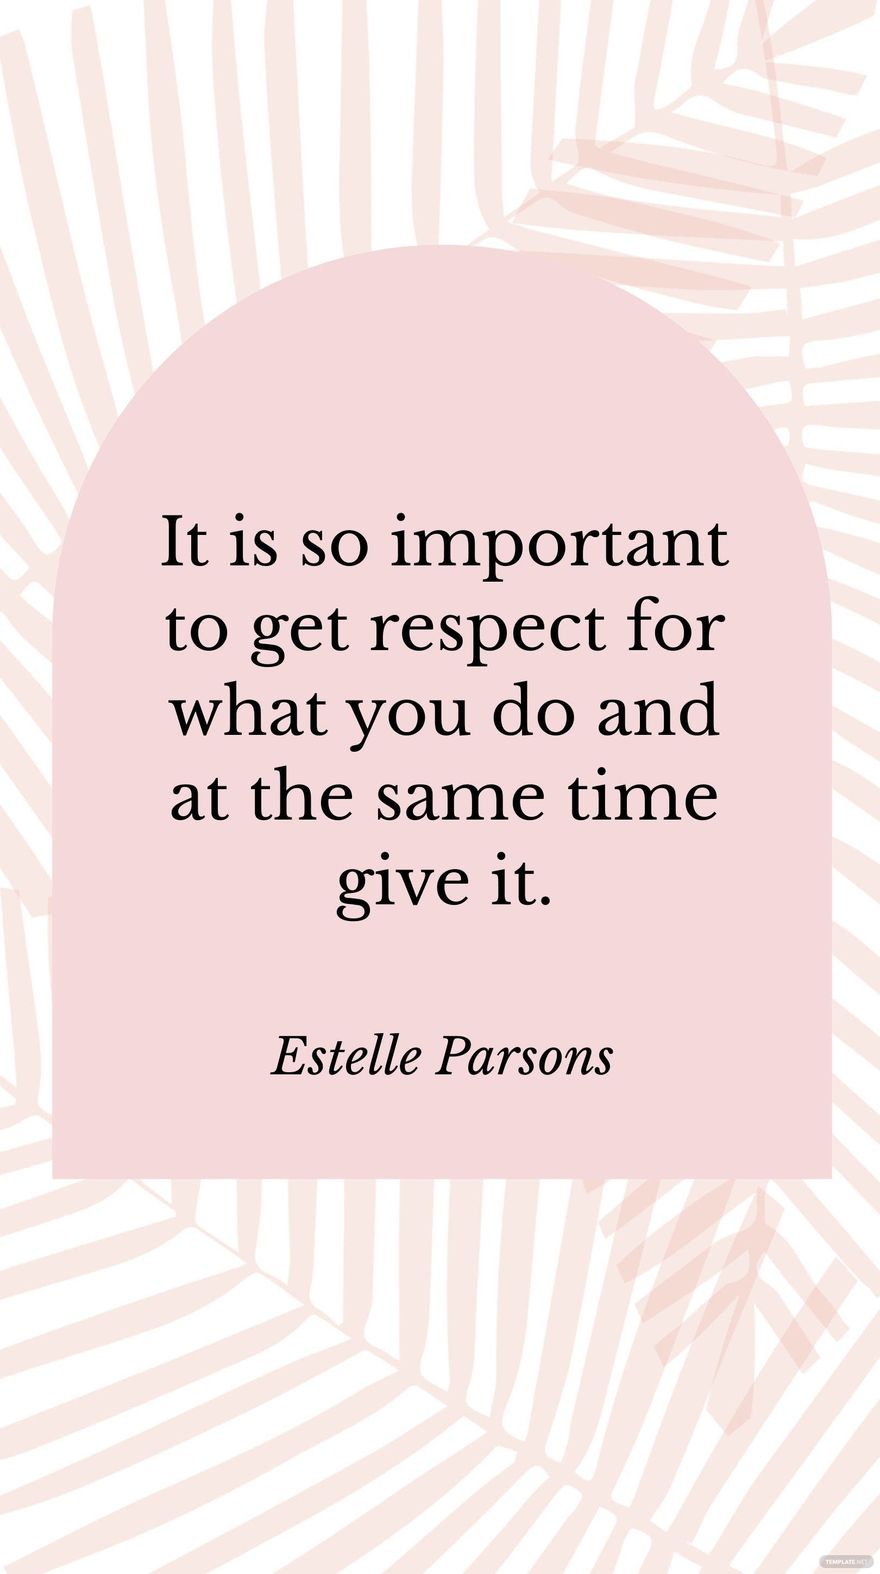 Free Estelle Parsons - It is so important to get respect for what you do and at the same time give it. in JPG